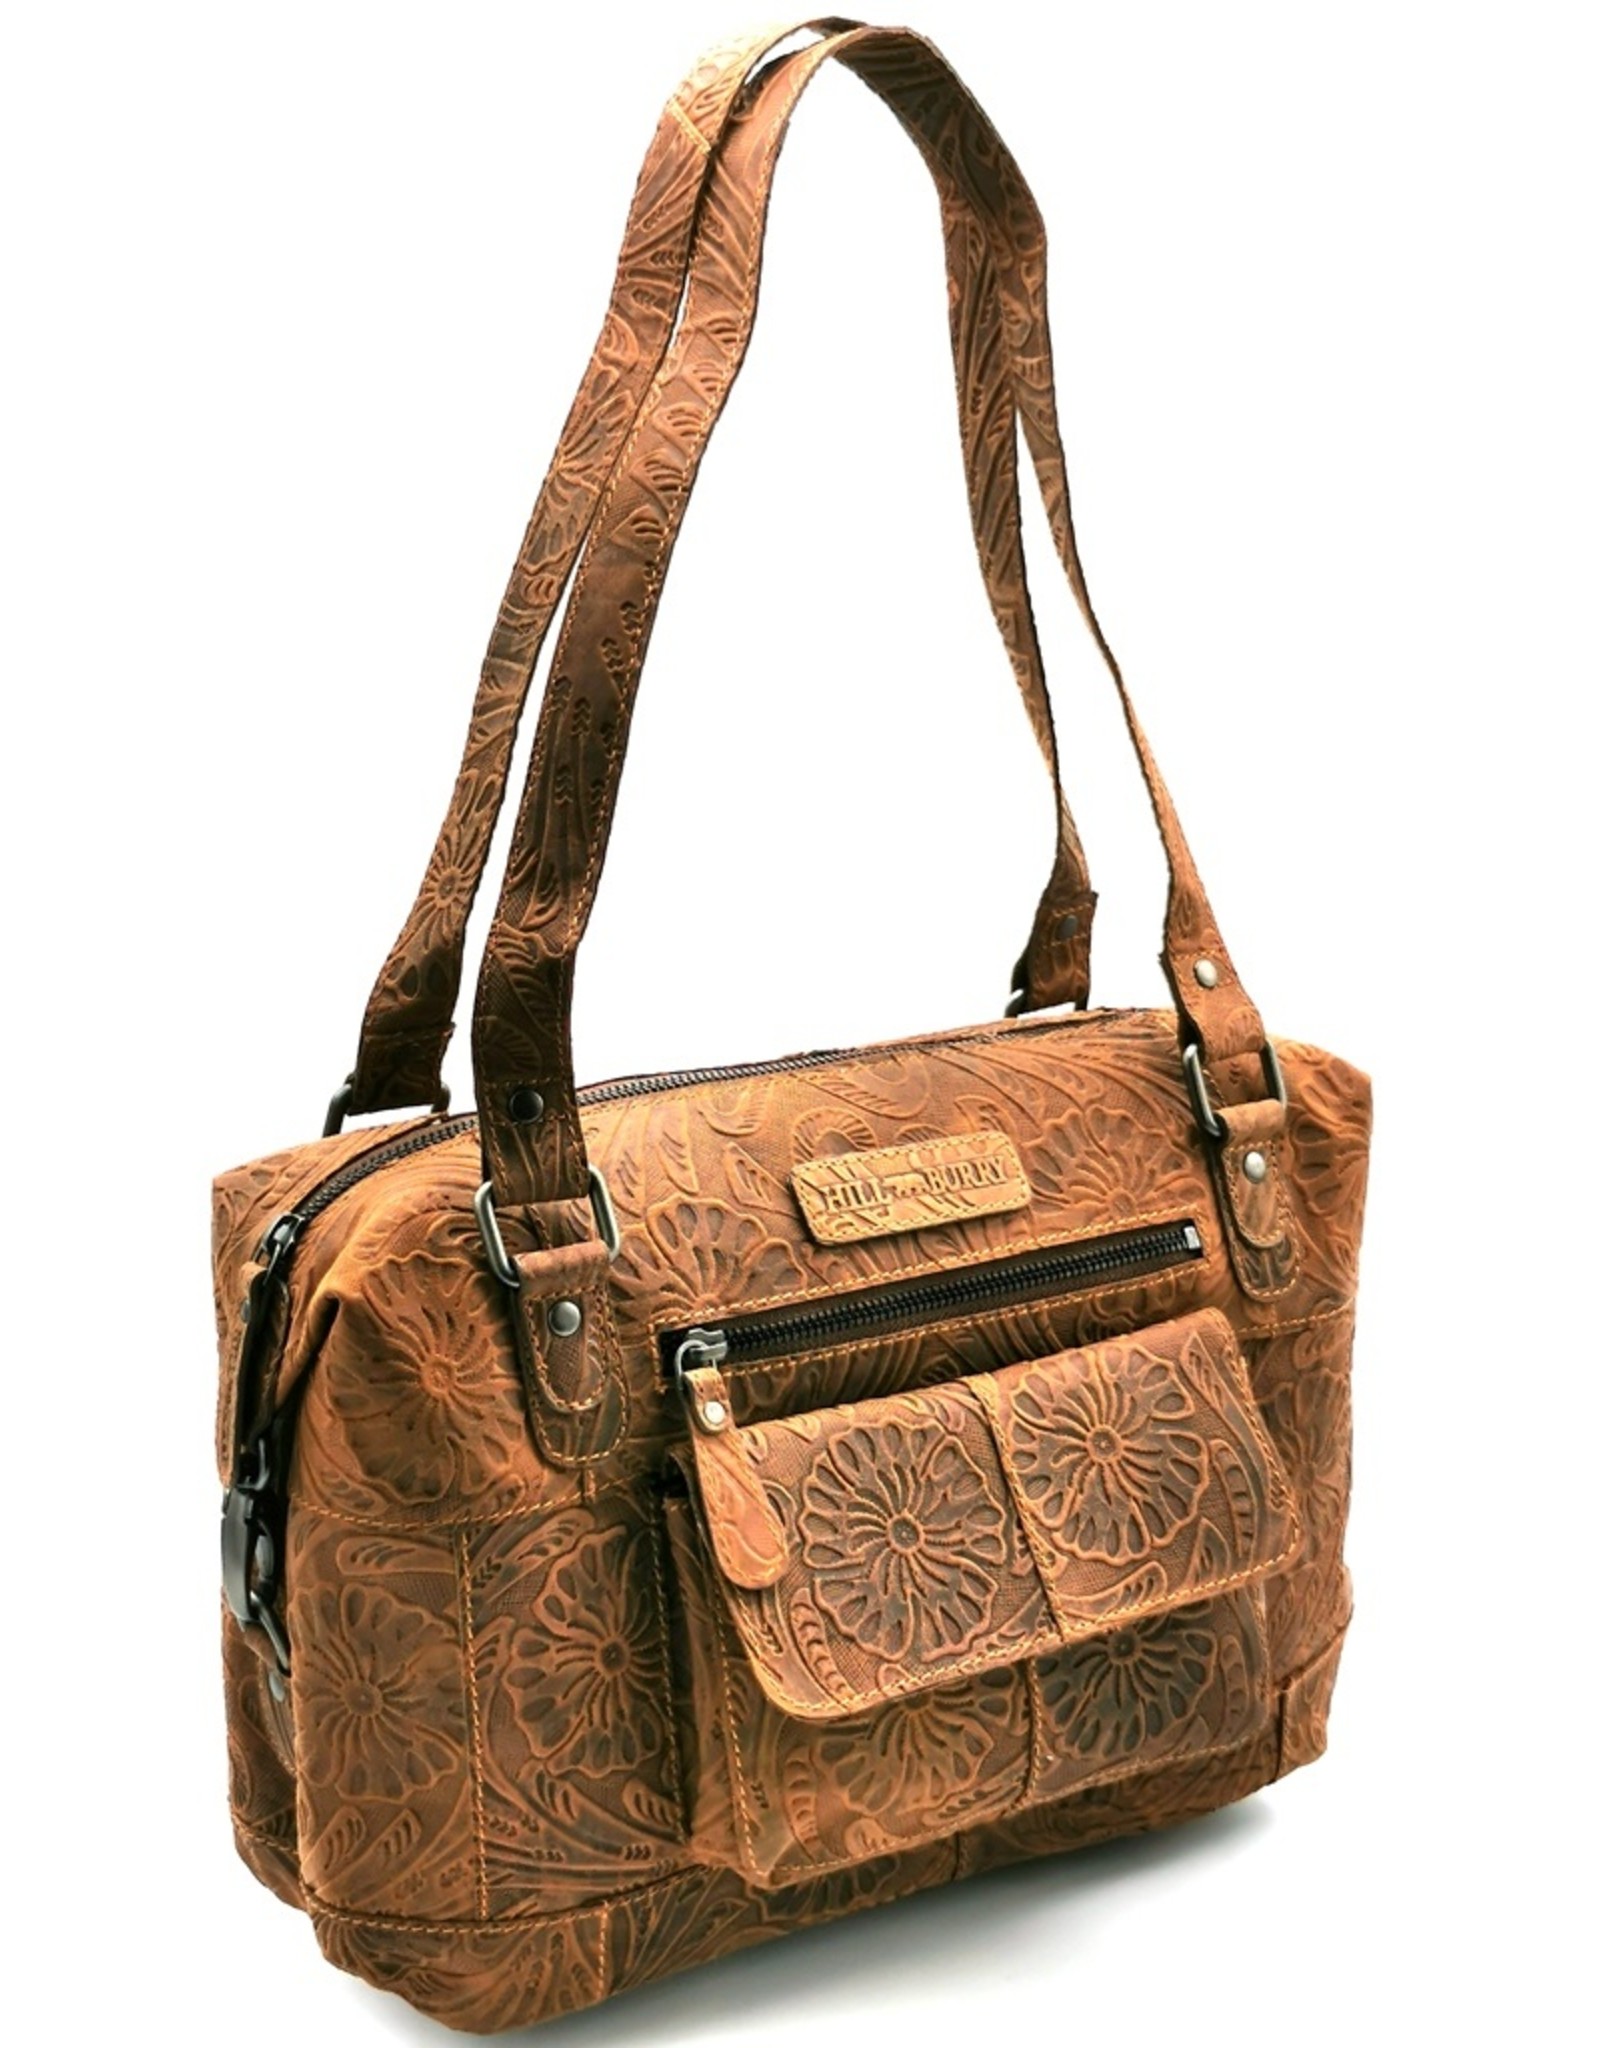 HillBurry Leather bags - Hillburry Leather Shoulder bag with Embossed Flowers